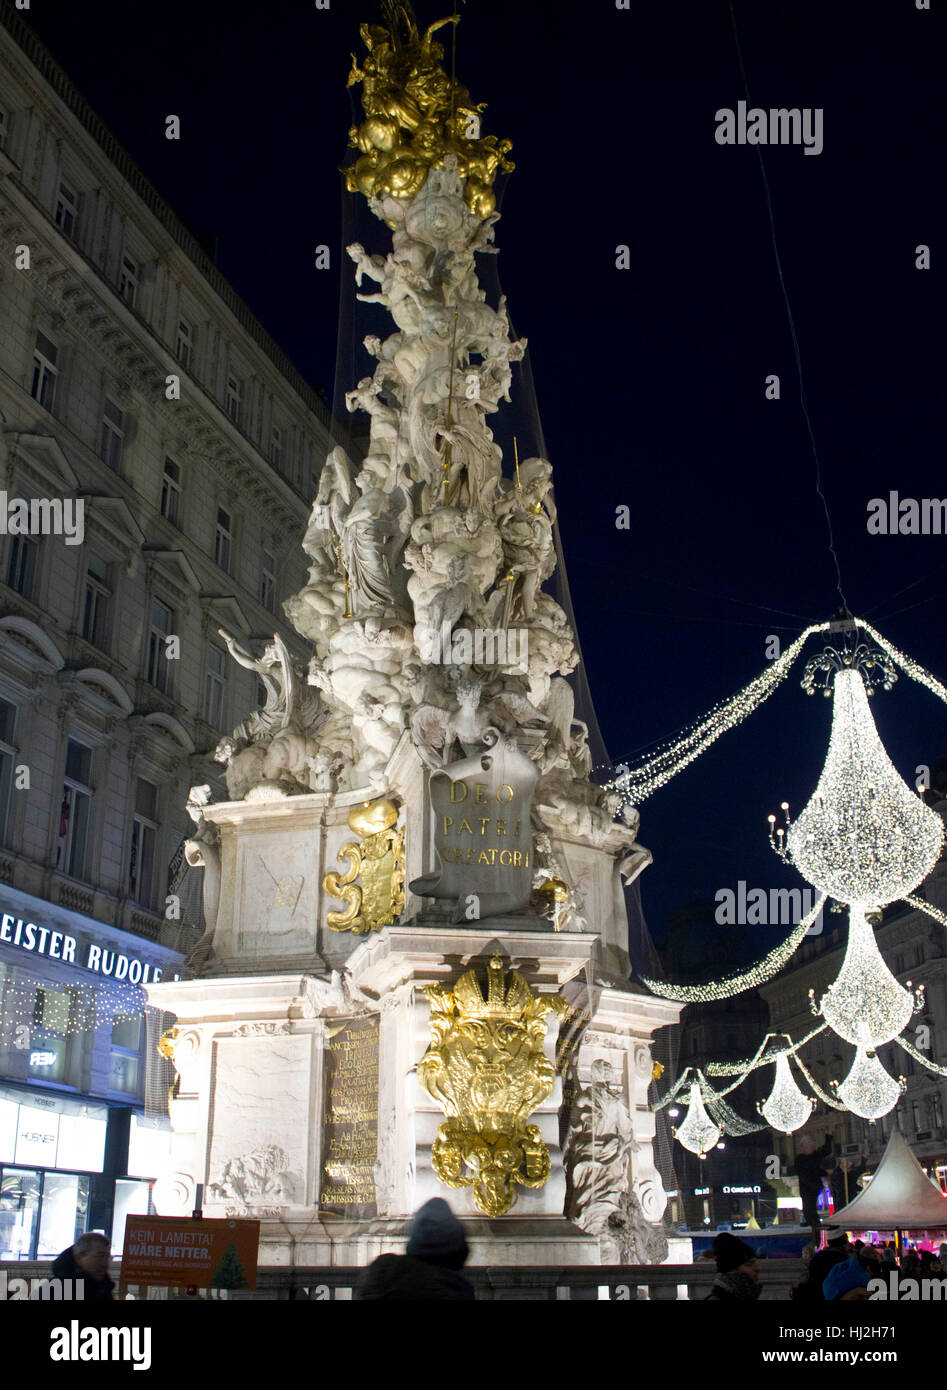 VIENNA, AUSTRIA - JANUARY 1 2016: Night view of Graben street in Vienna during Christmas time, with Pestsaule memorial column in the foreground Stock Photo